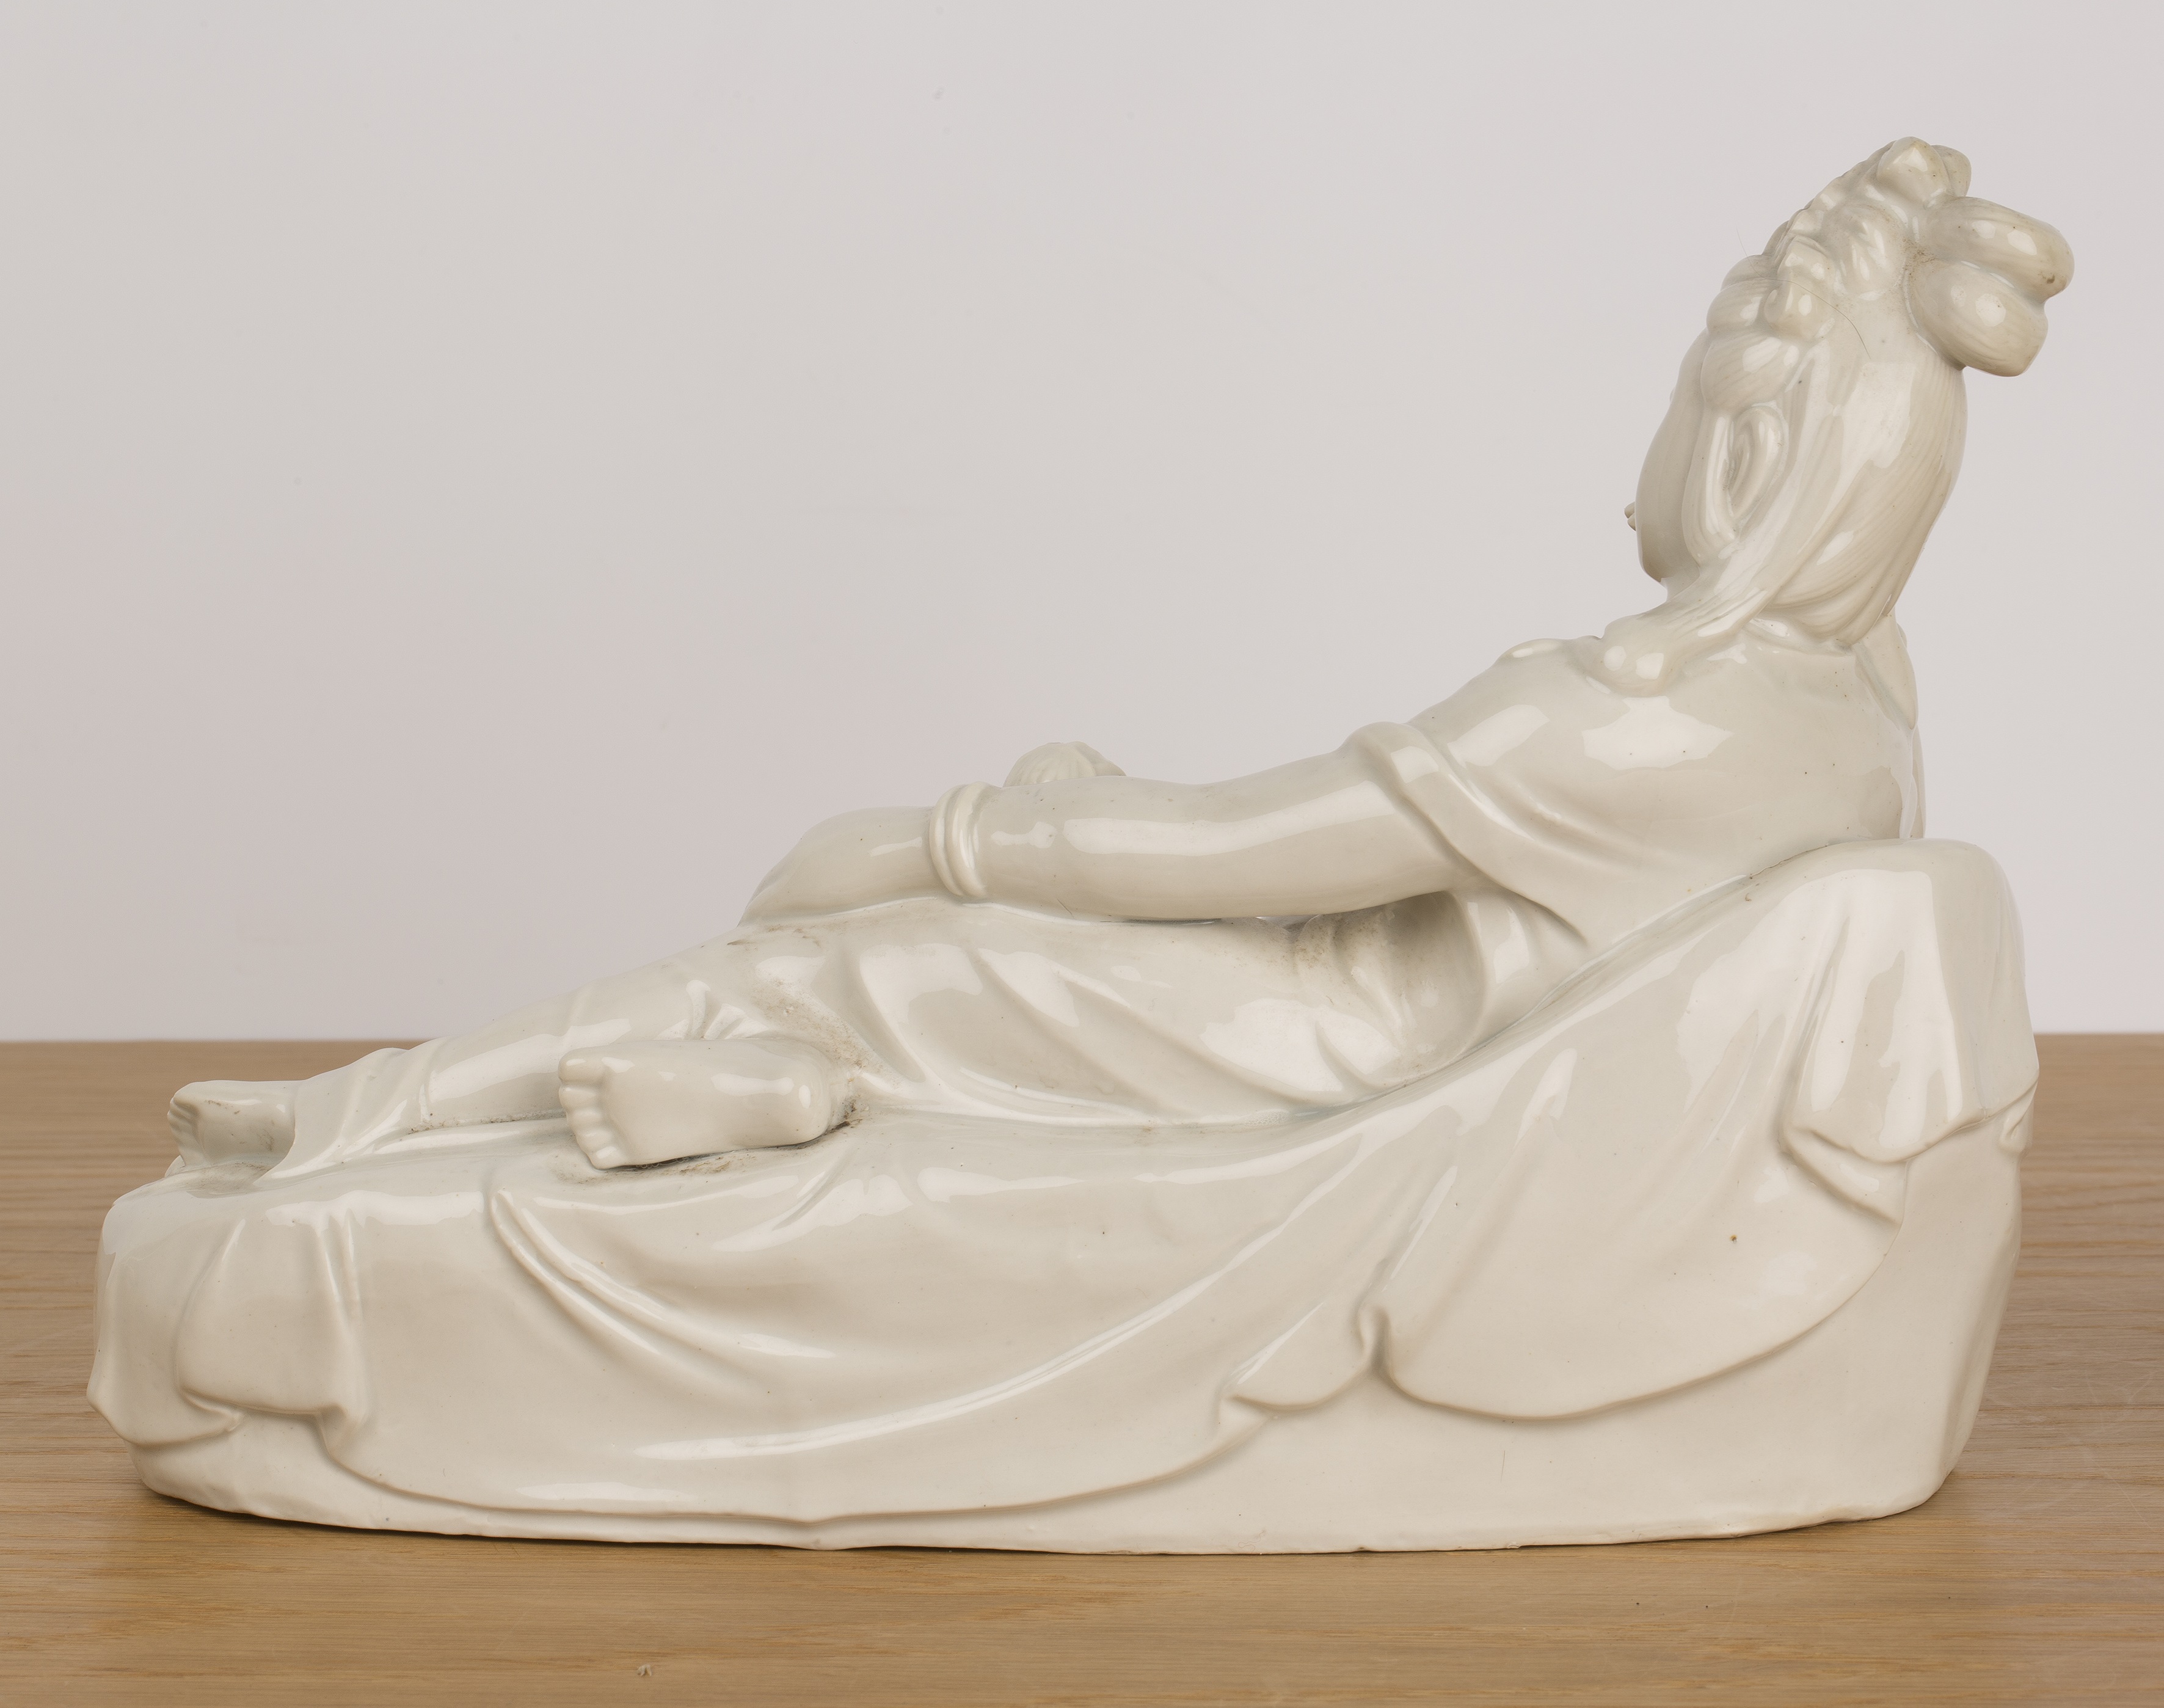 Blanc-de-chine figure of Guan Yin Chinese, early 20th Century the recumbent figure with her right - Image 2 of 3